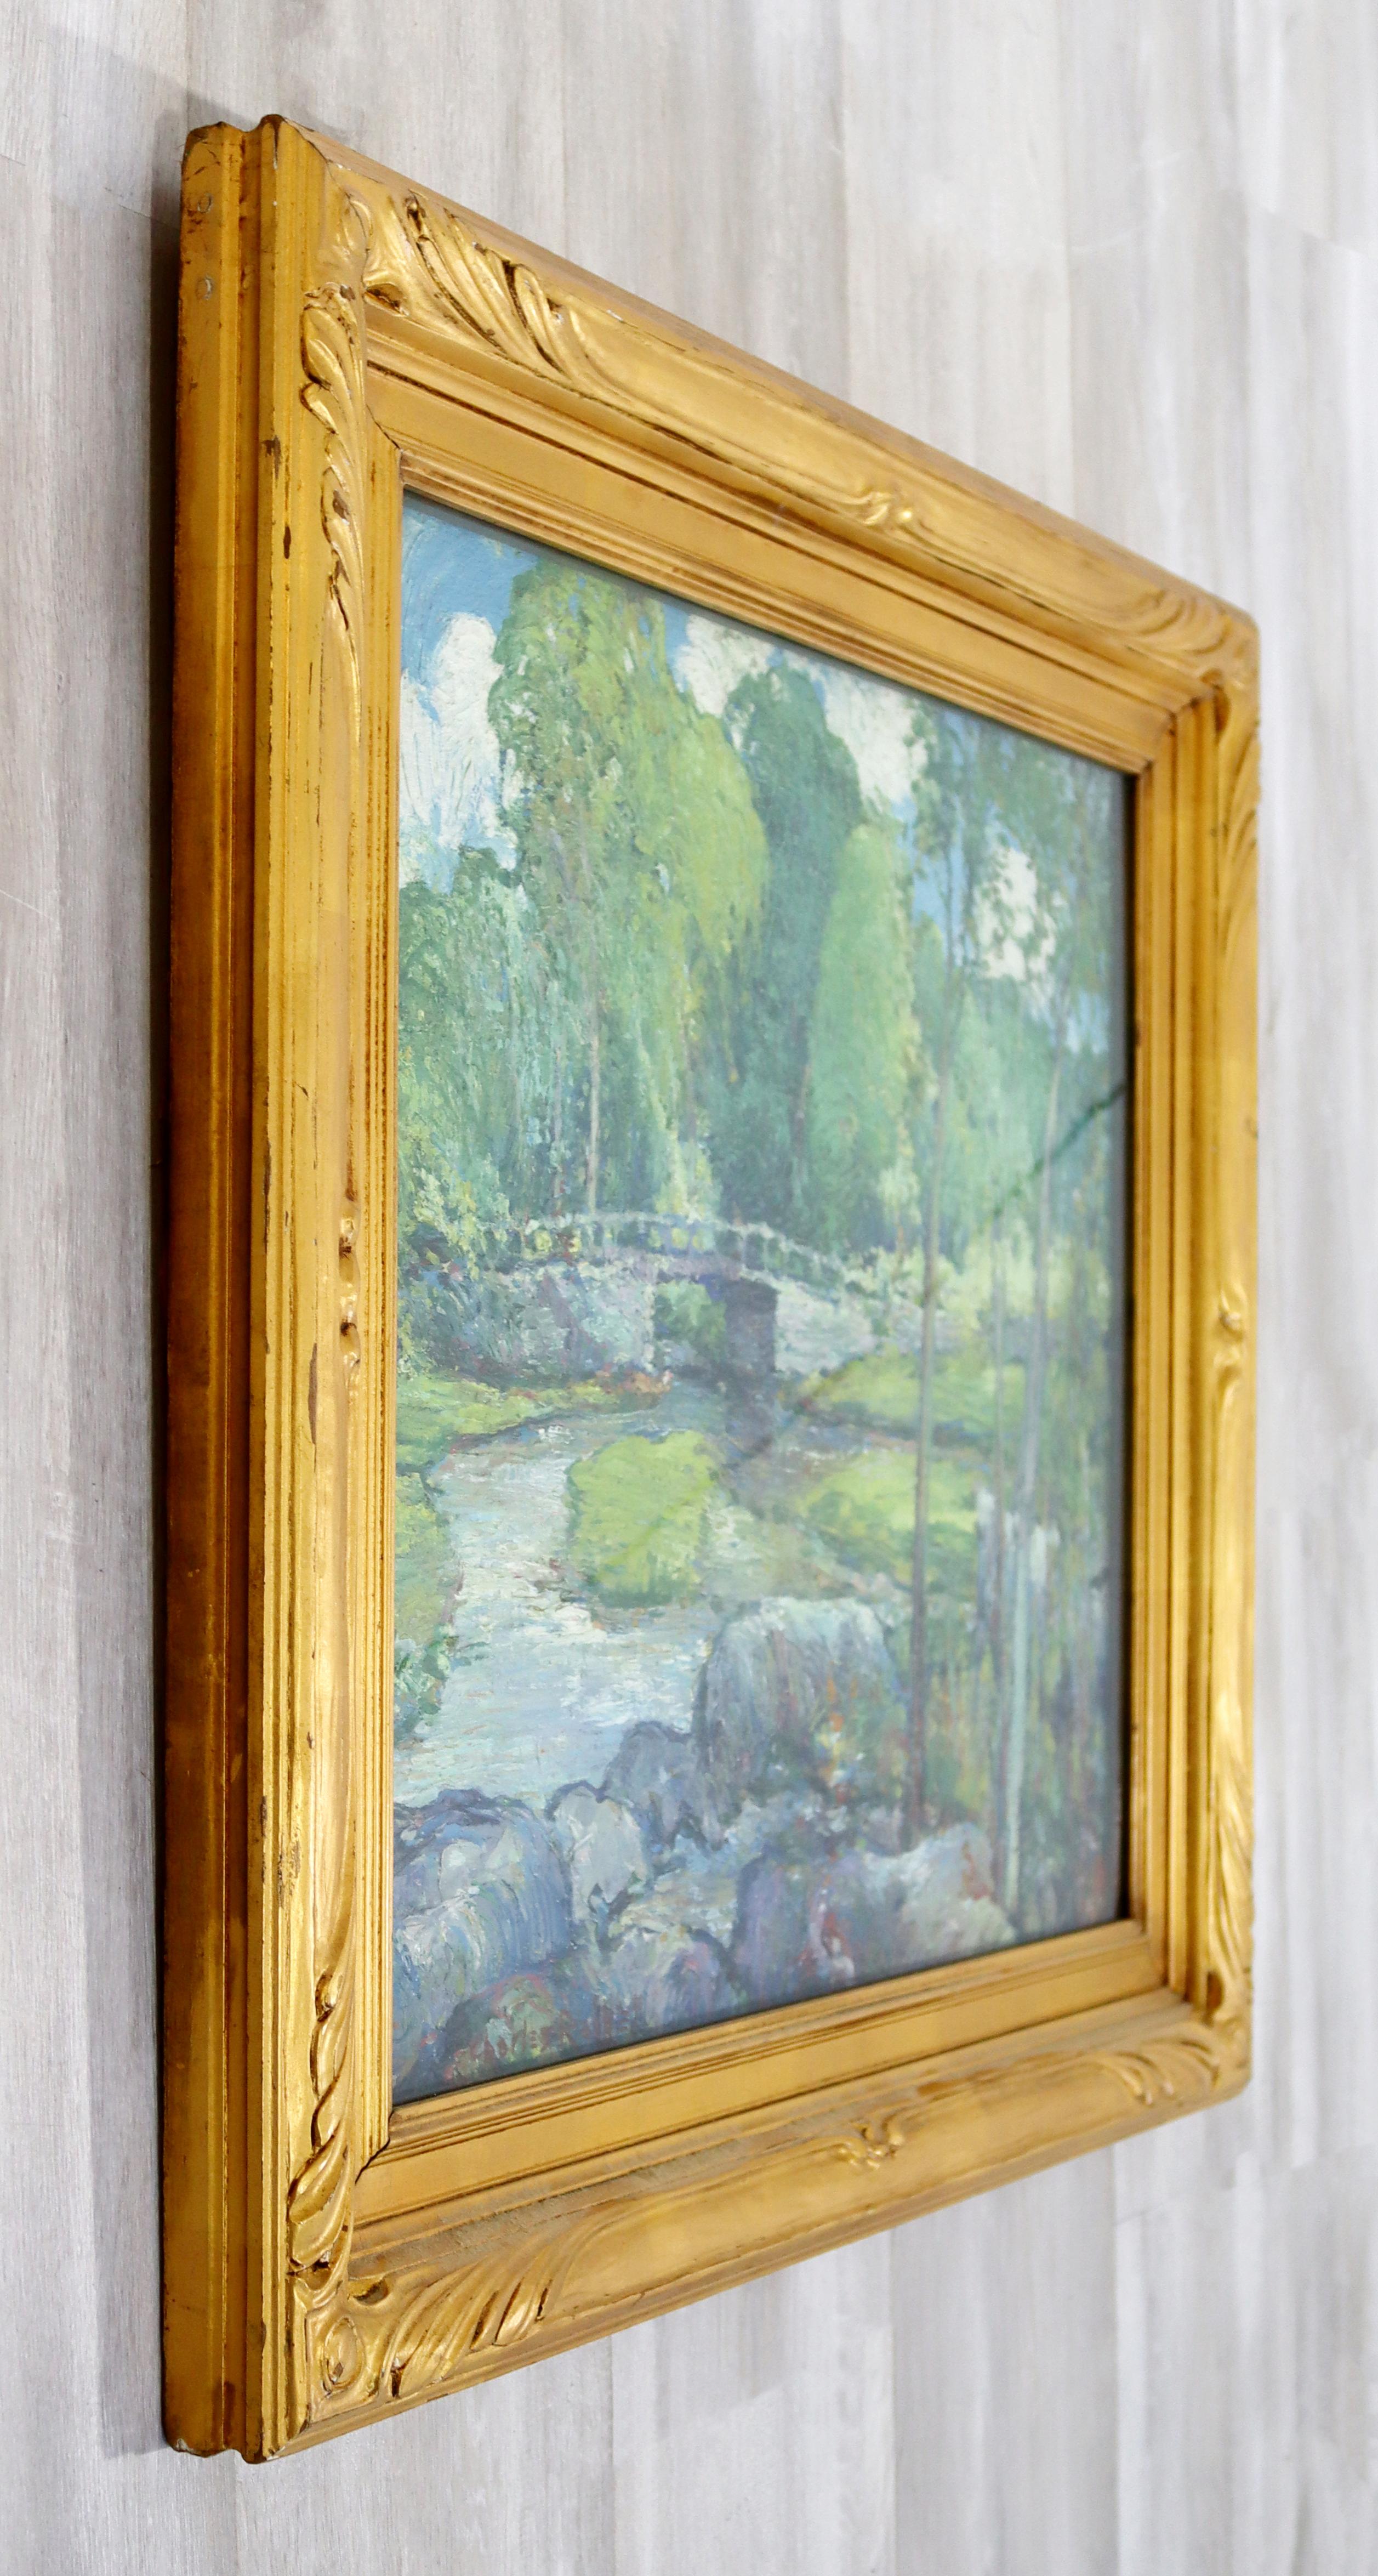 Mid-20th Century Antique Post Impressionist Framed Oil Board Painting Signed Charles Reiffel 1930